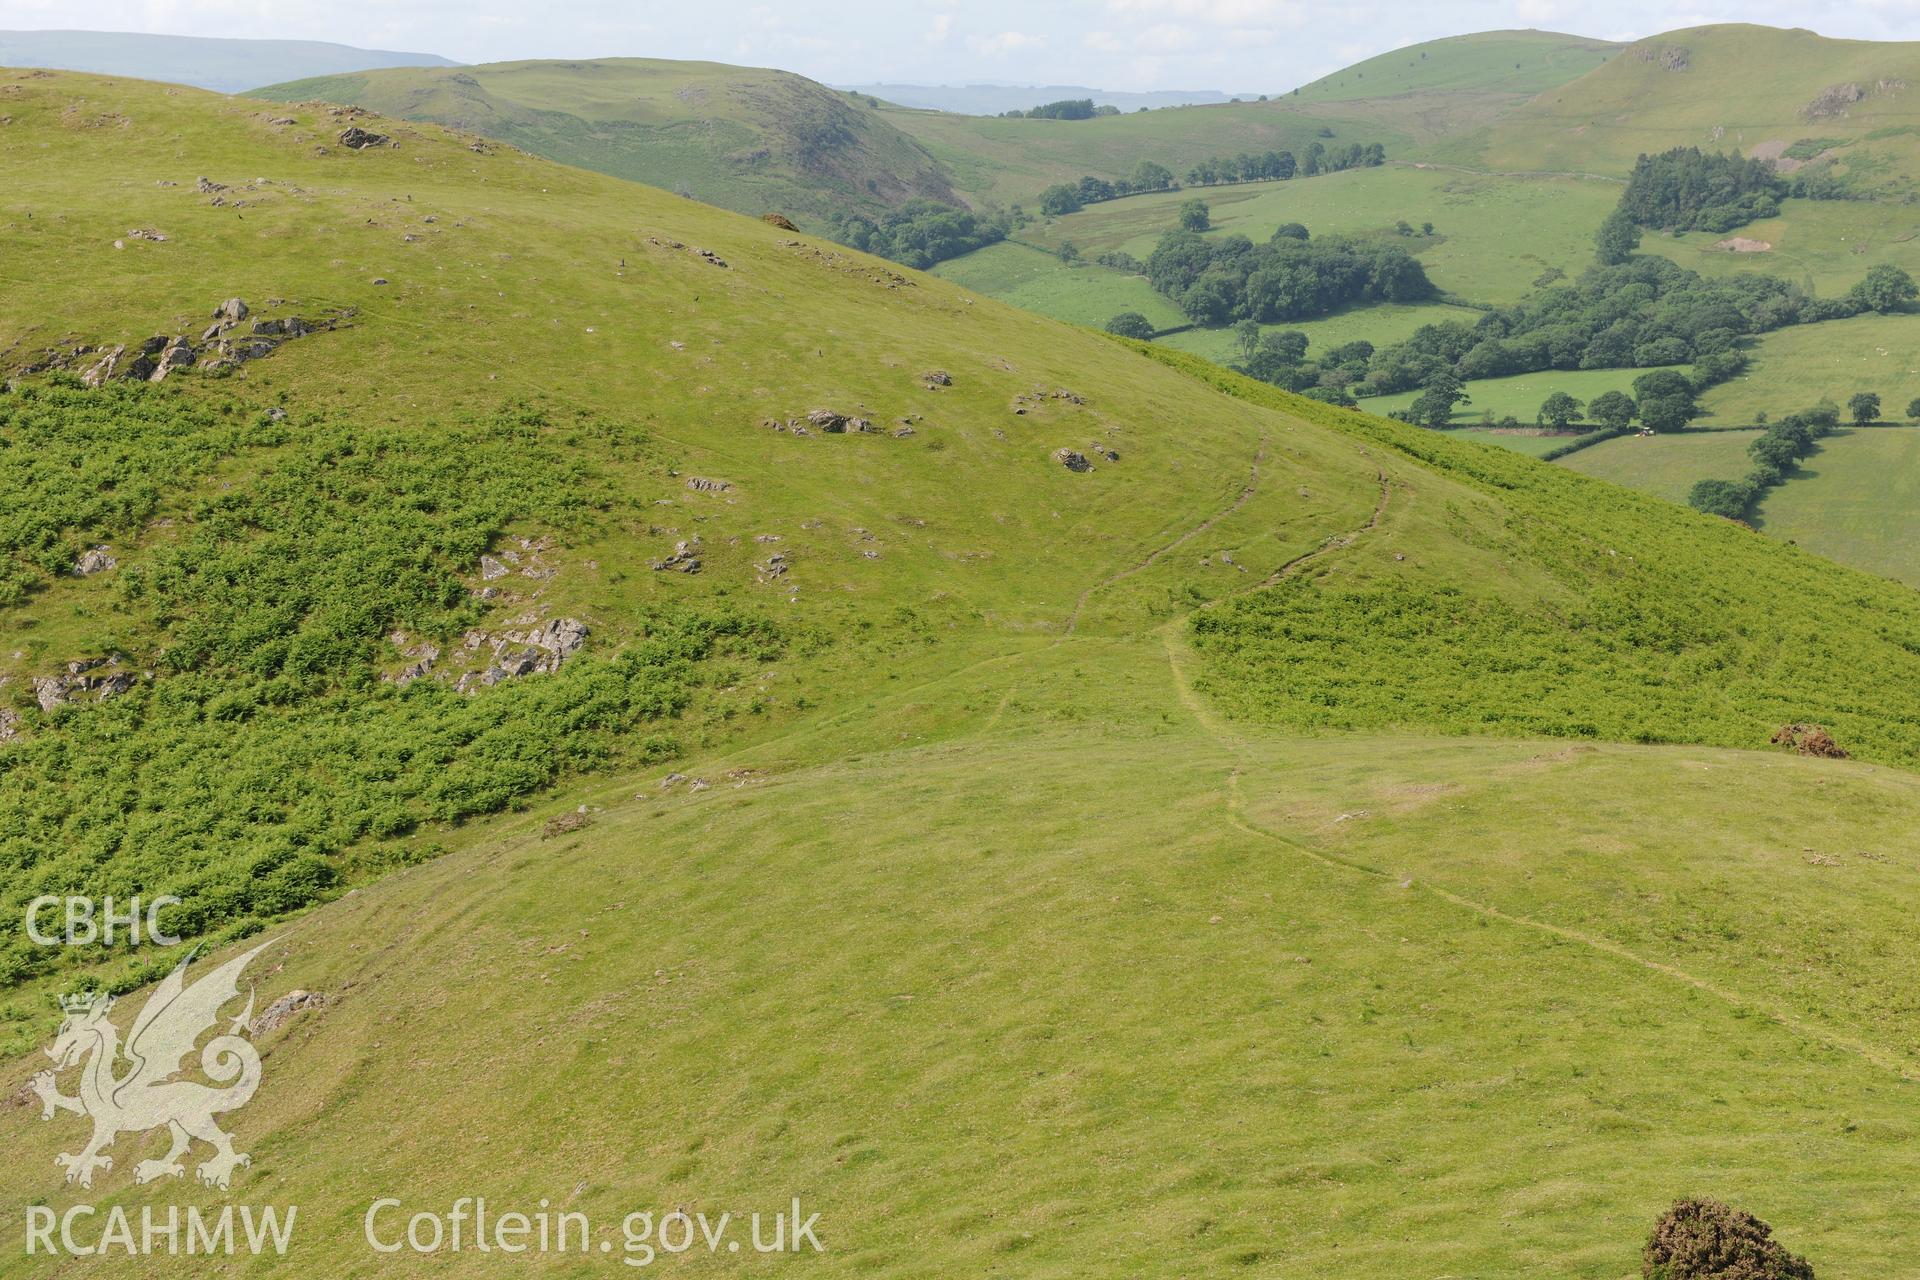 Photographic survey of Castle Bank hillfort, showing details of ramparts and earthworks, conducted on 5th July 2013.